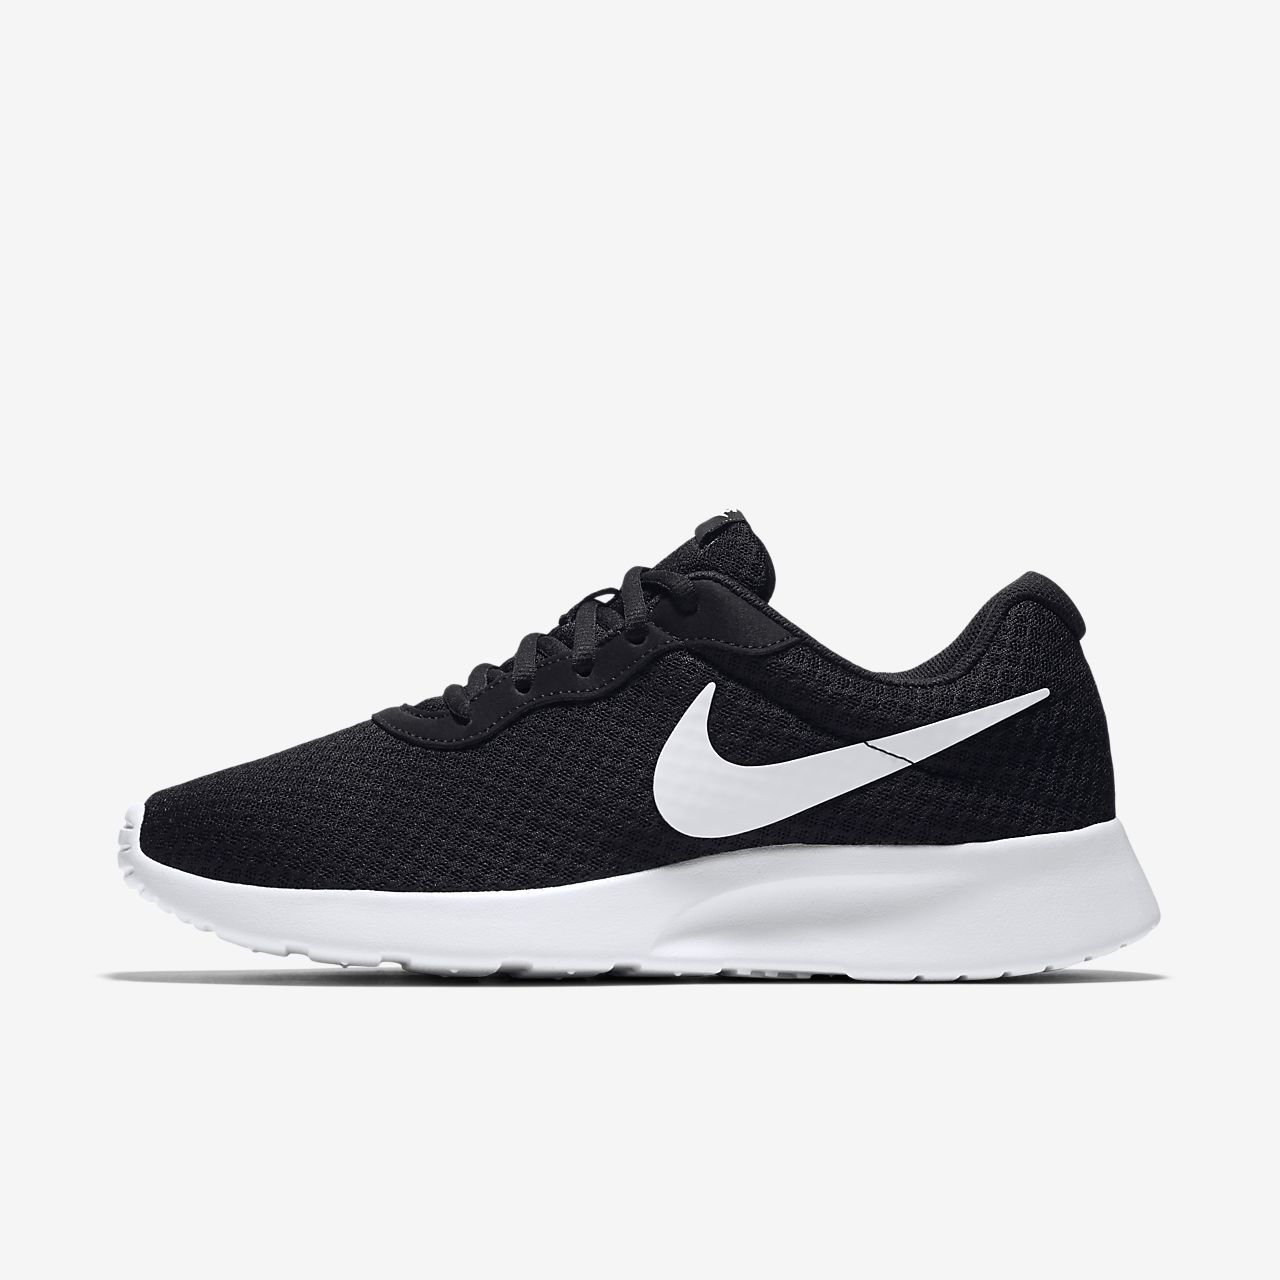 chaussure nike tanjun, ... Chaussure Nike Tanjun pour Homme